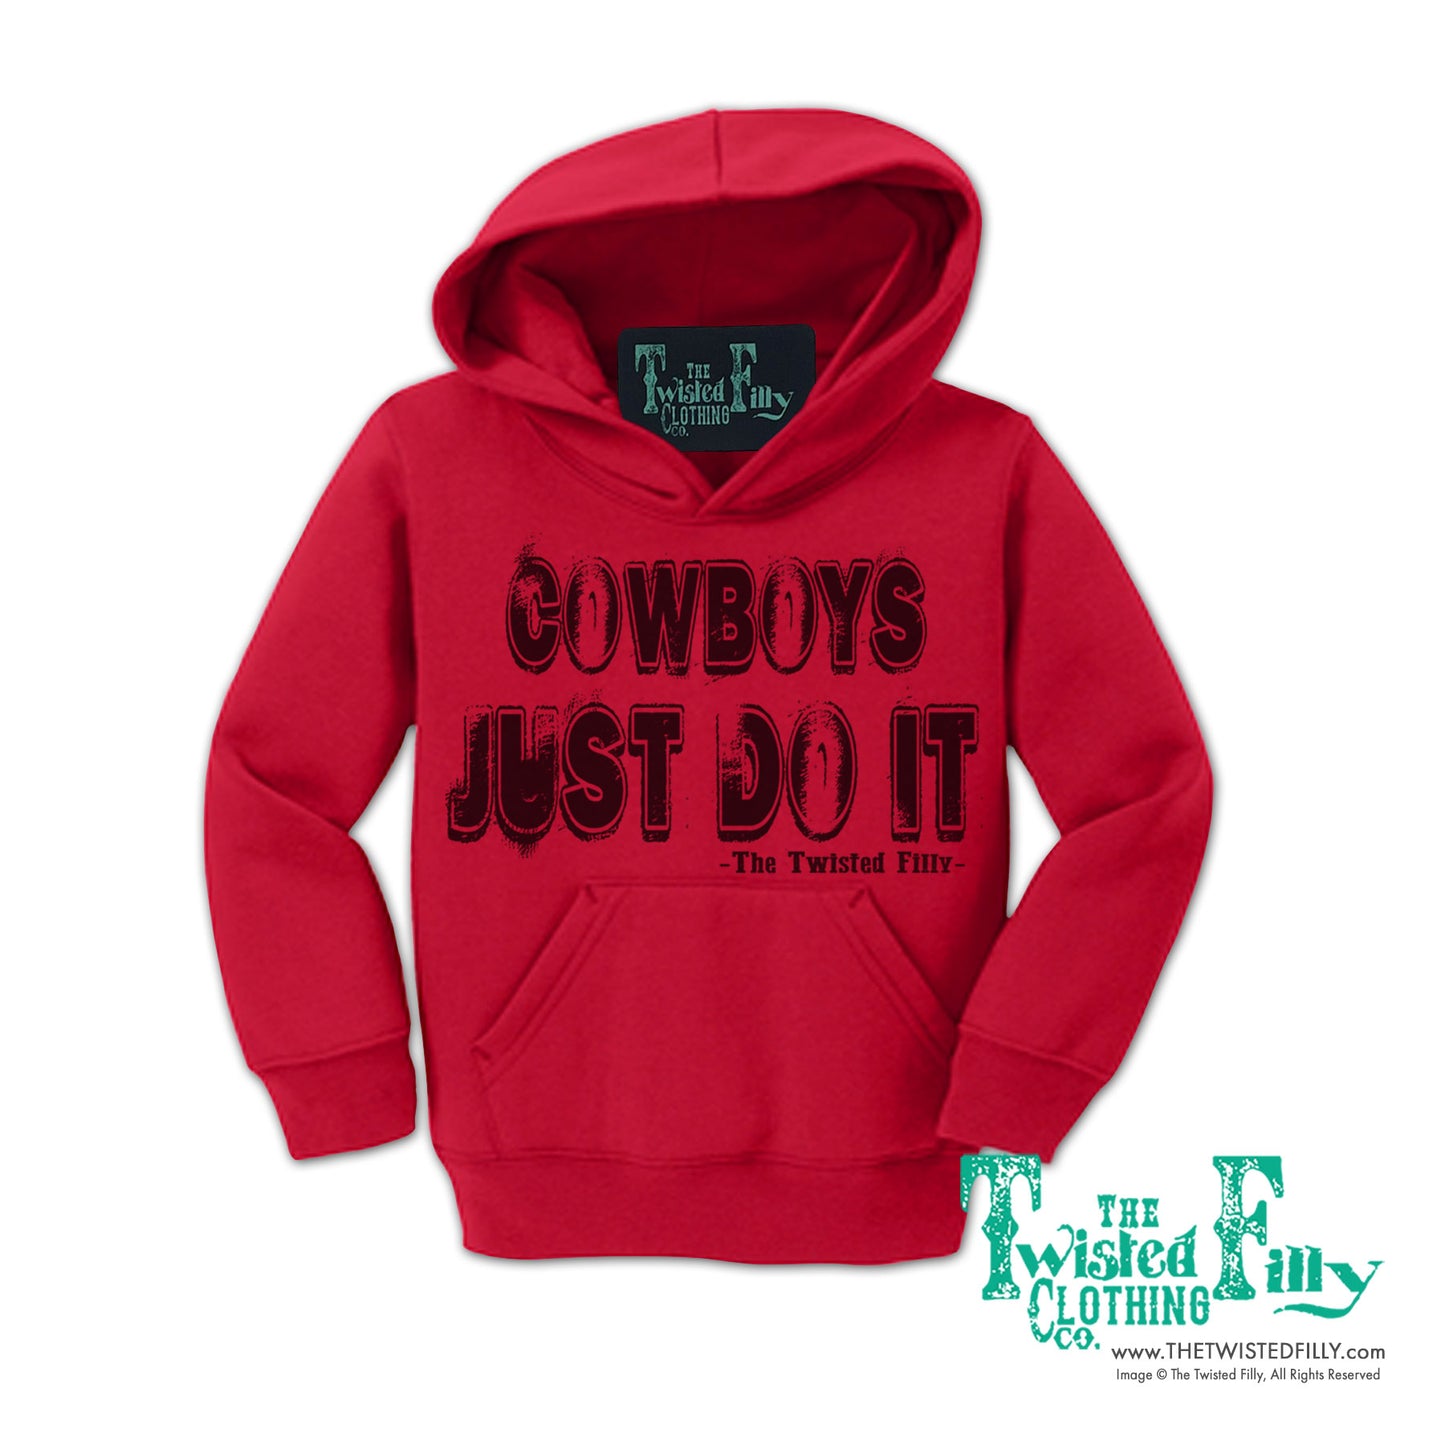 Cowboys Just Do It - Mens Adult Hoodie - Assorted Colors